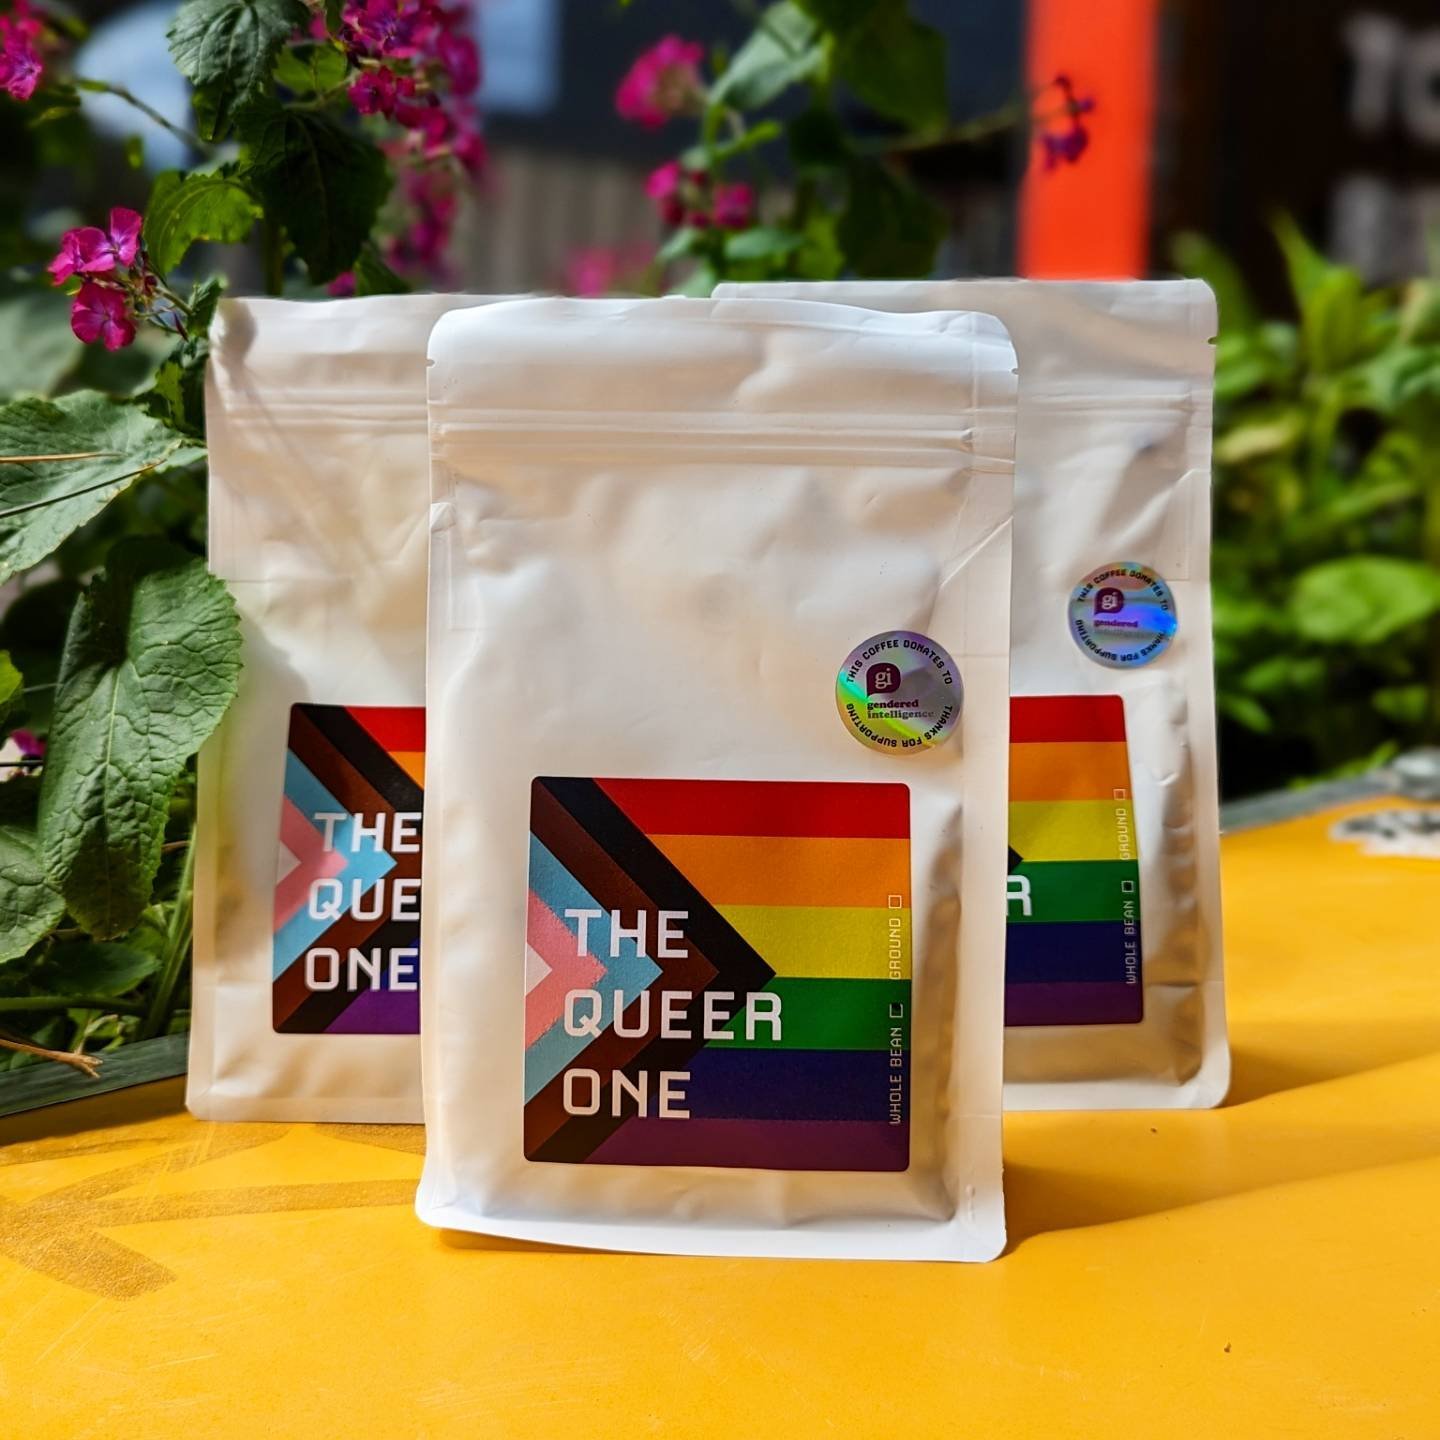 super sexy coffee from @weareherecoffee now with super gay packaging to remind you that we are the friendliest bunch of non-judgemental humans selling silly little coffees to like-minded humans. This One is a gorgeous washed Peruvian from female memb